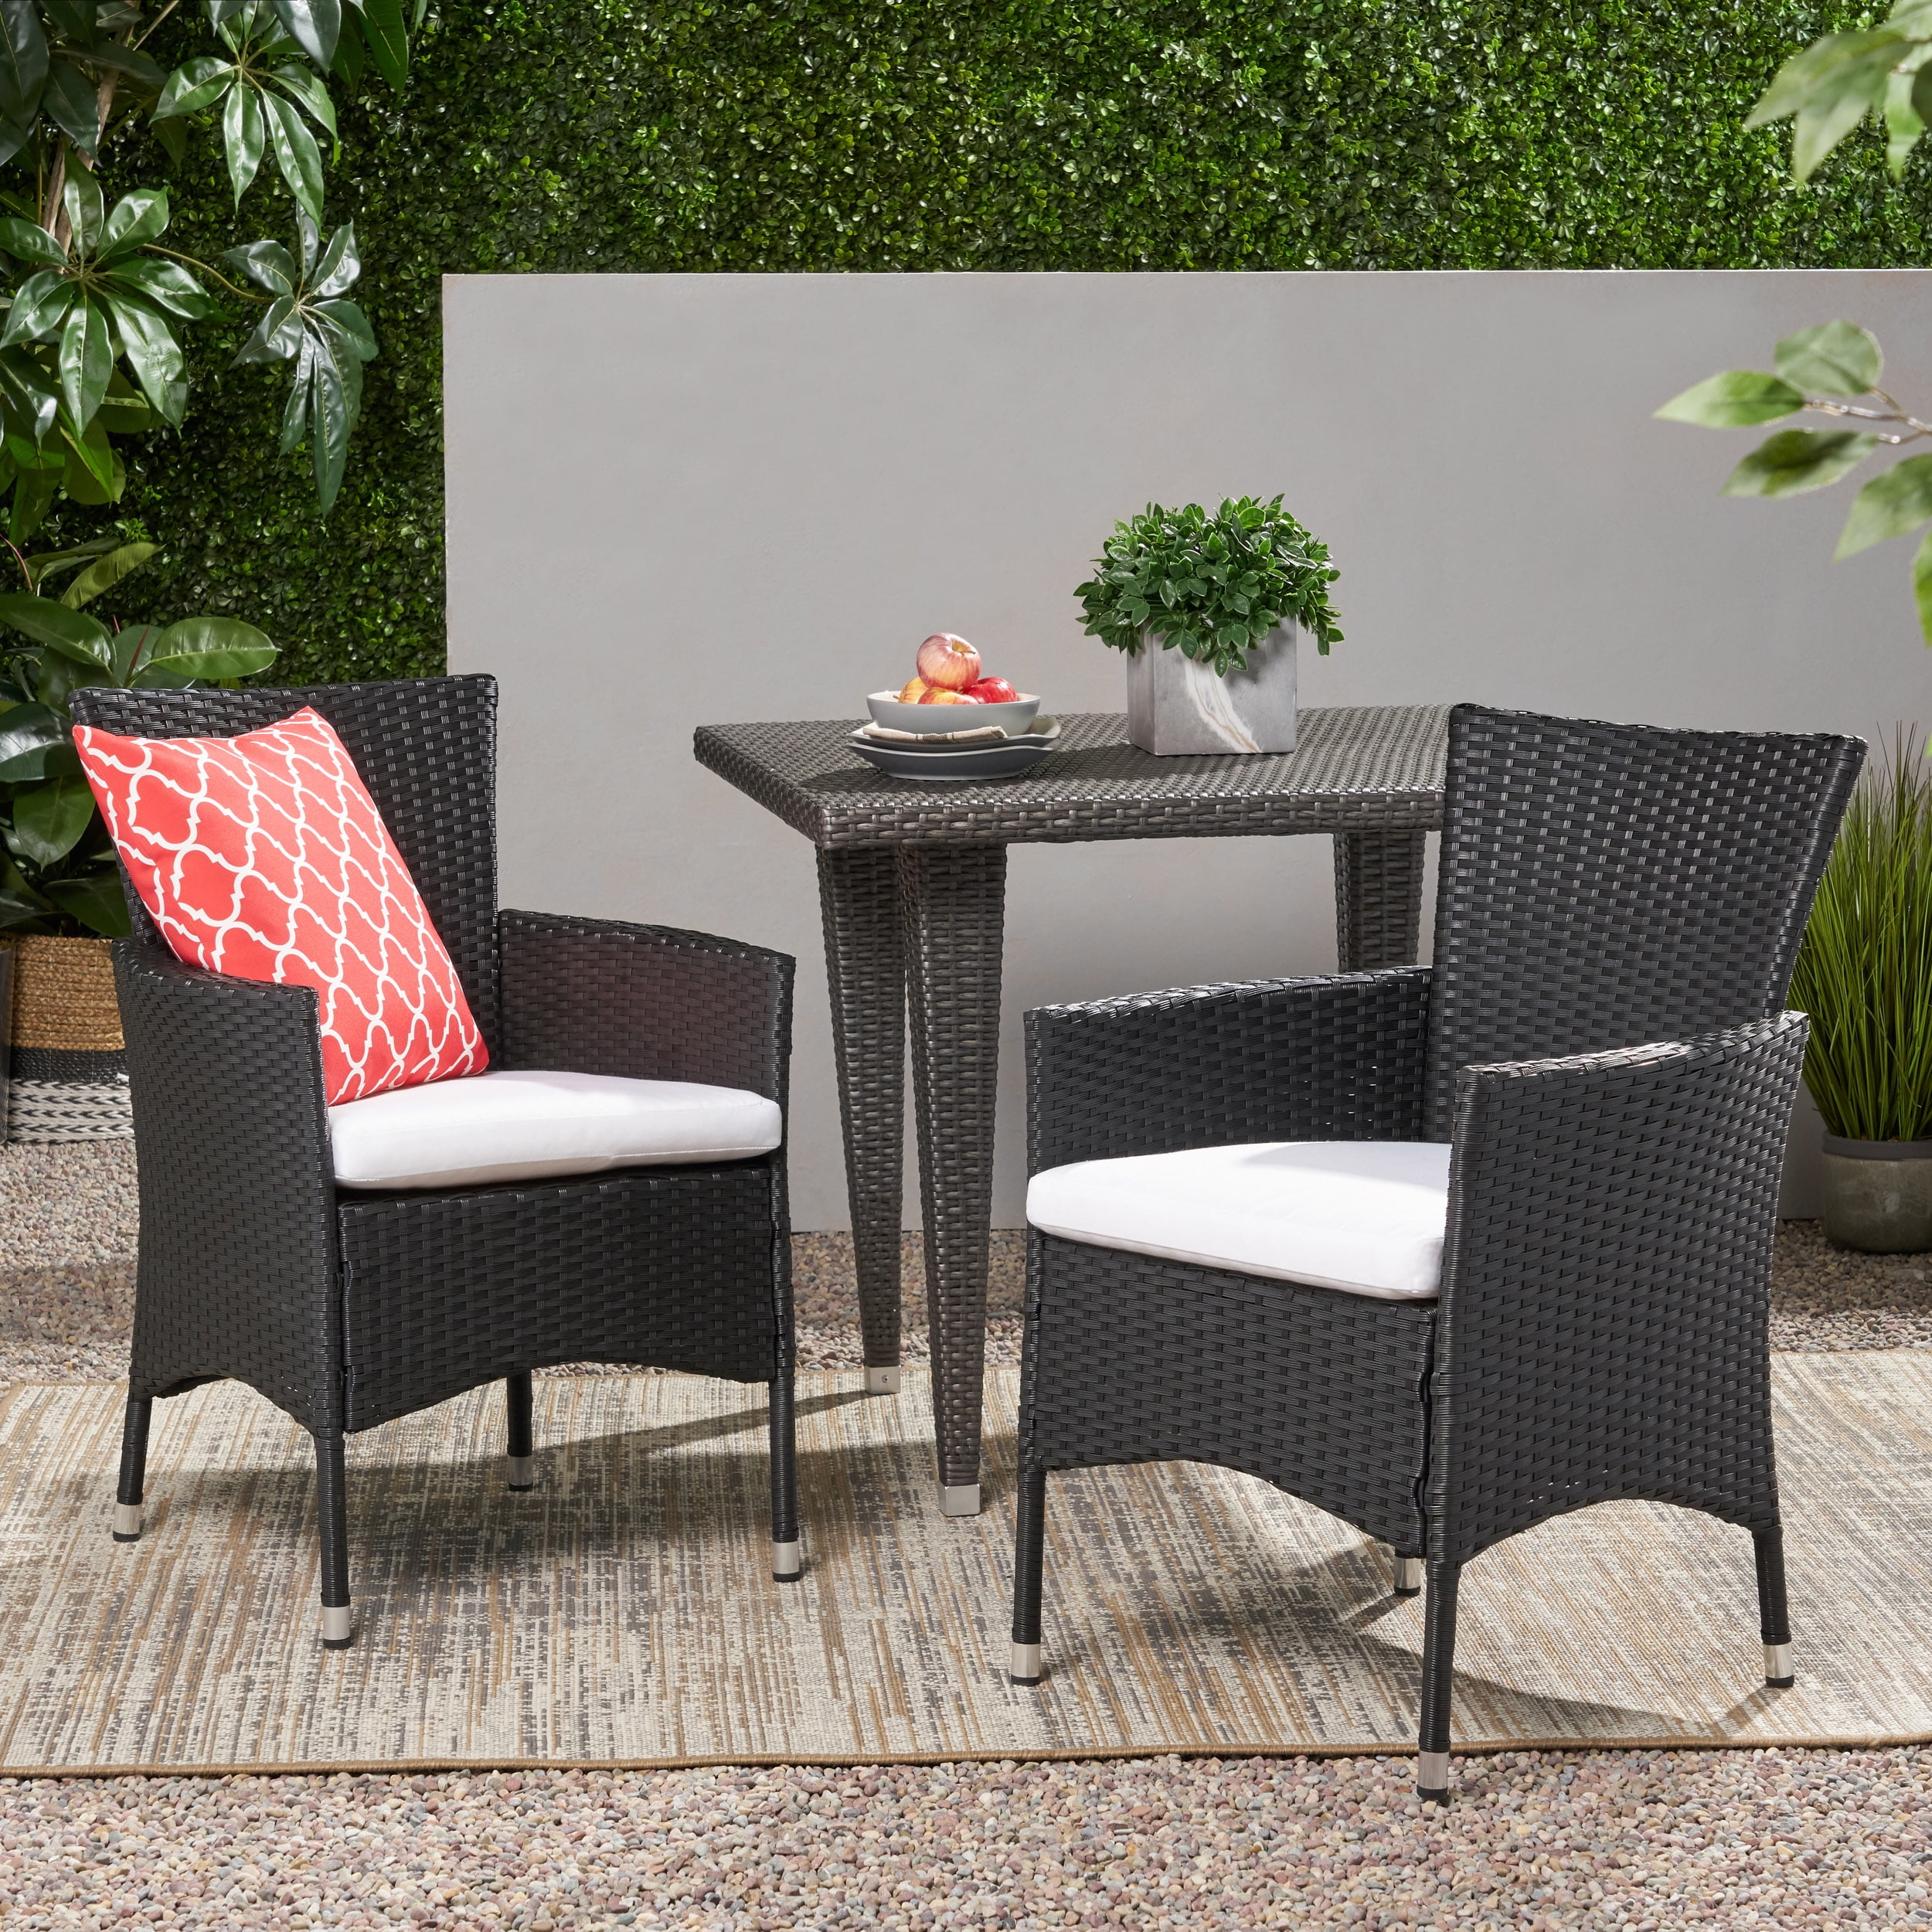 Camilo Outdoor Wicker Dining Chairs with Cushions, Set of 2, Black